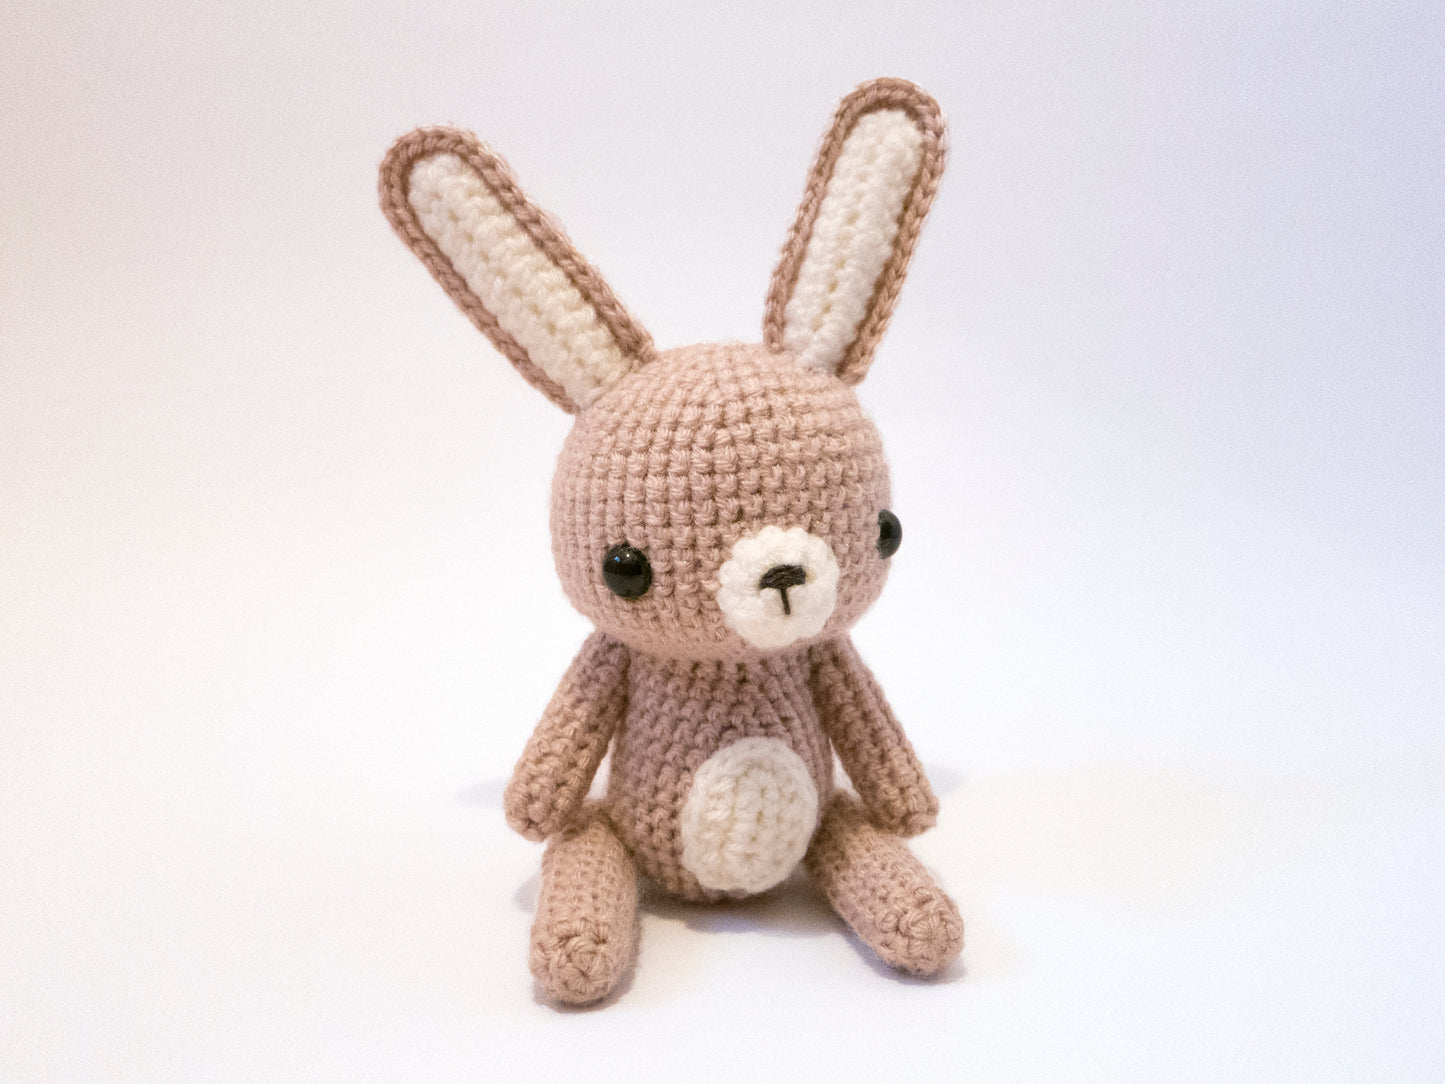 amigurumi crochet rabbit pattern front view with large ears